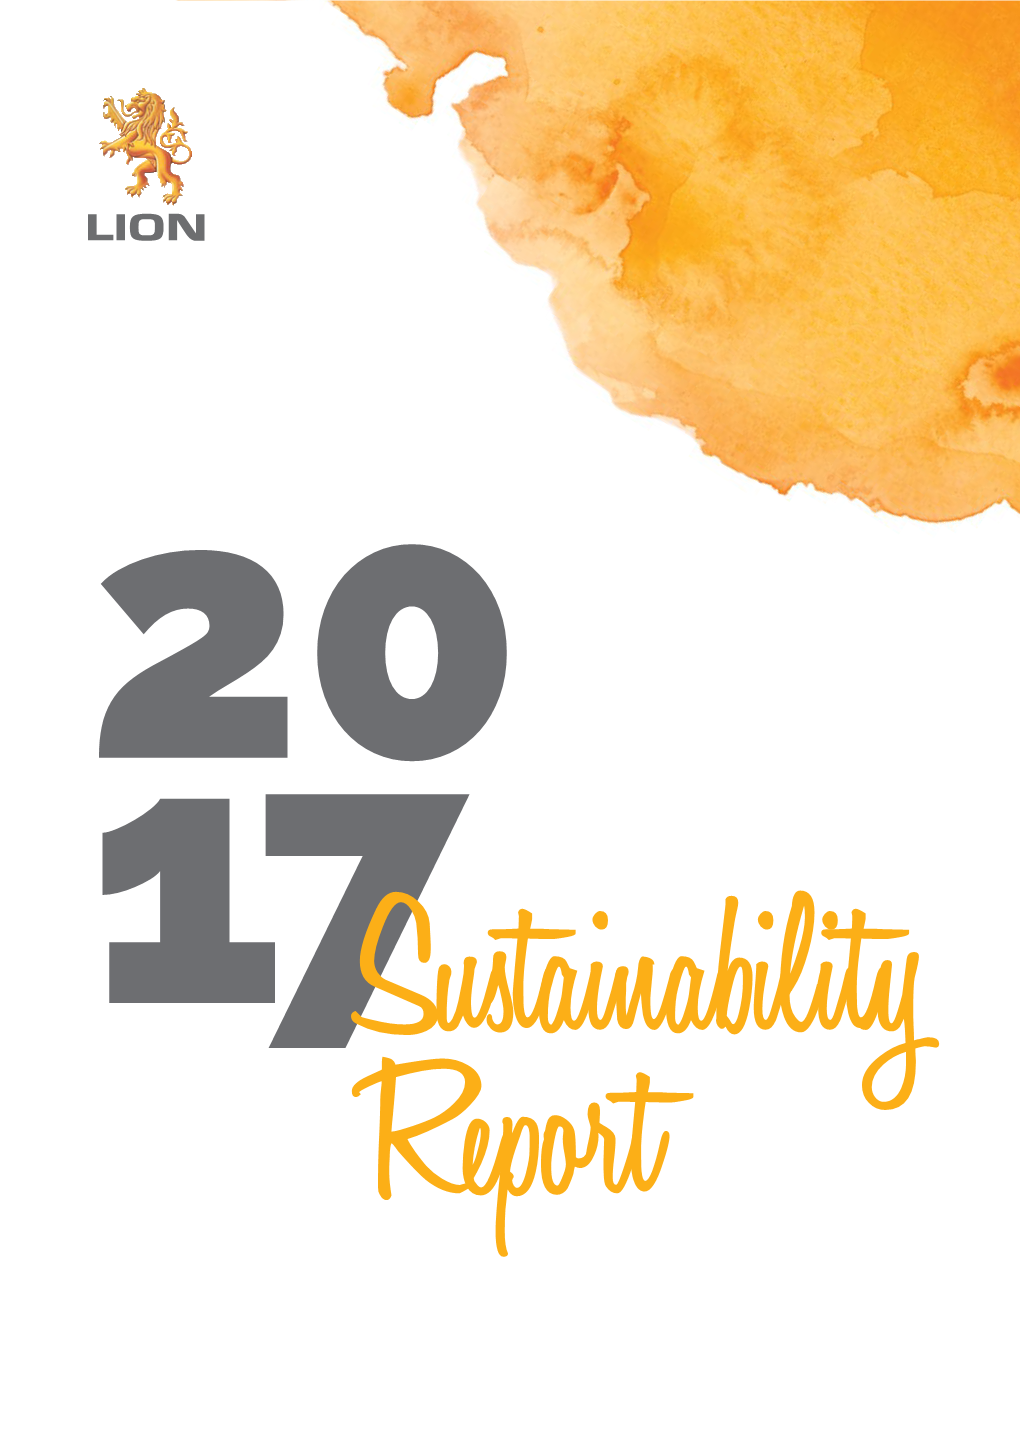 Lion Sustainability Report 2017